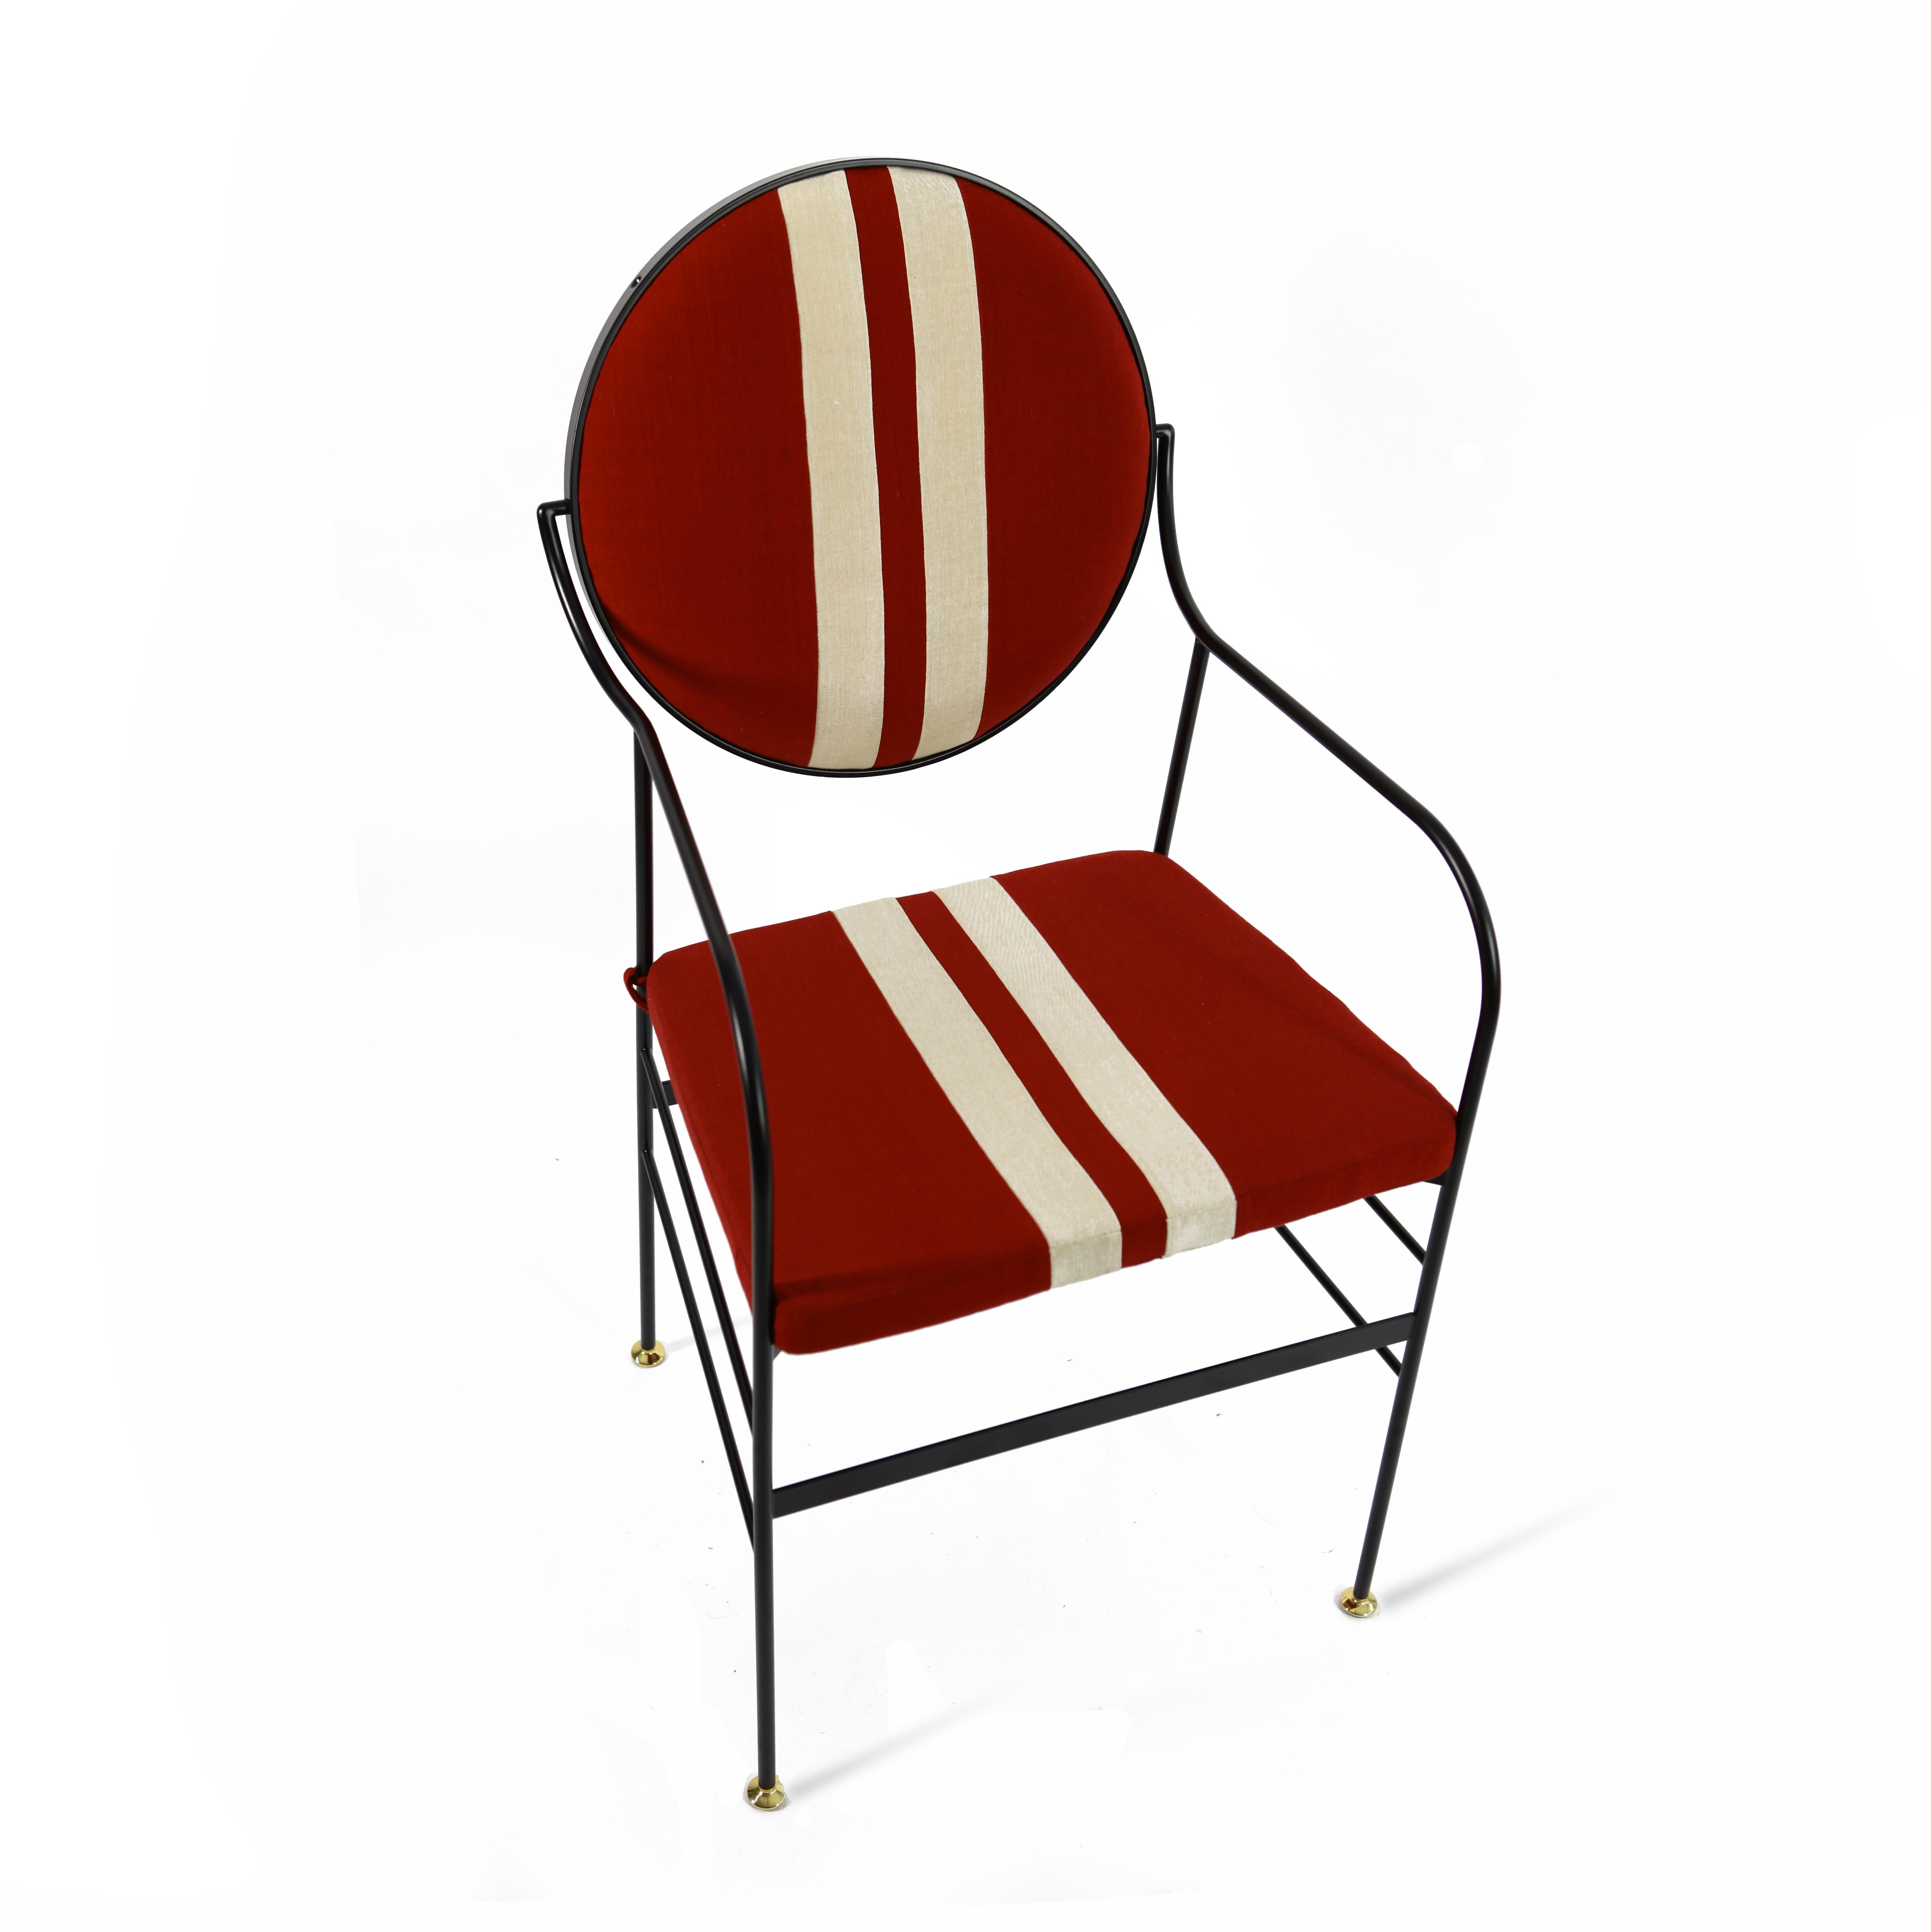 This striking chair is in iron with brass feet. The iron is dust painted and oven finished in matt black, while the back can rotate on its structure to achieve the perfect inclination. The fabric of back and seat is digital print to evoke the